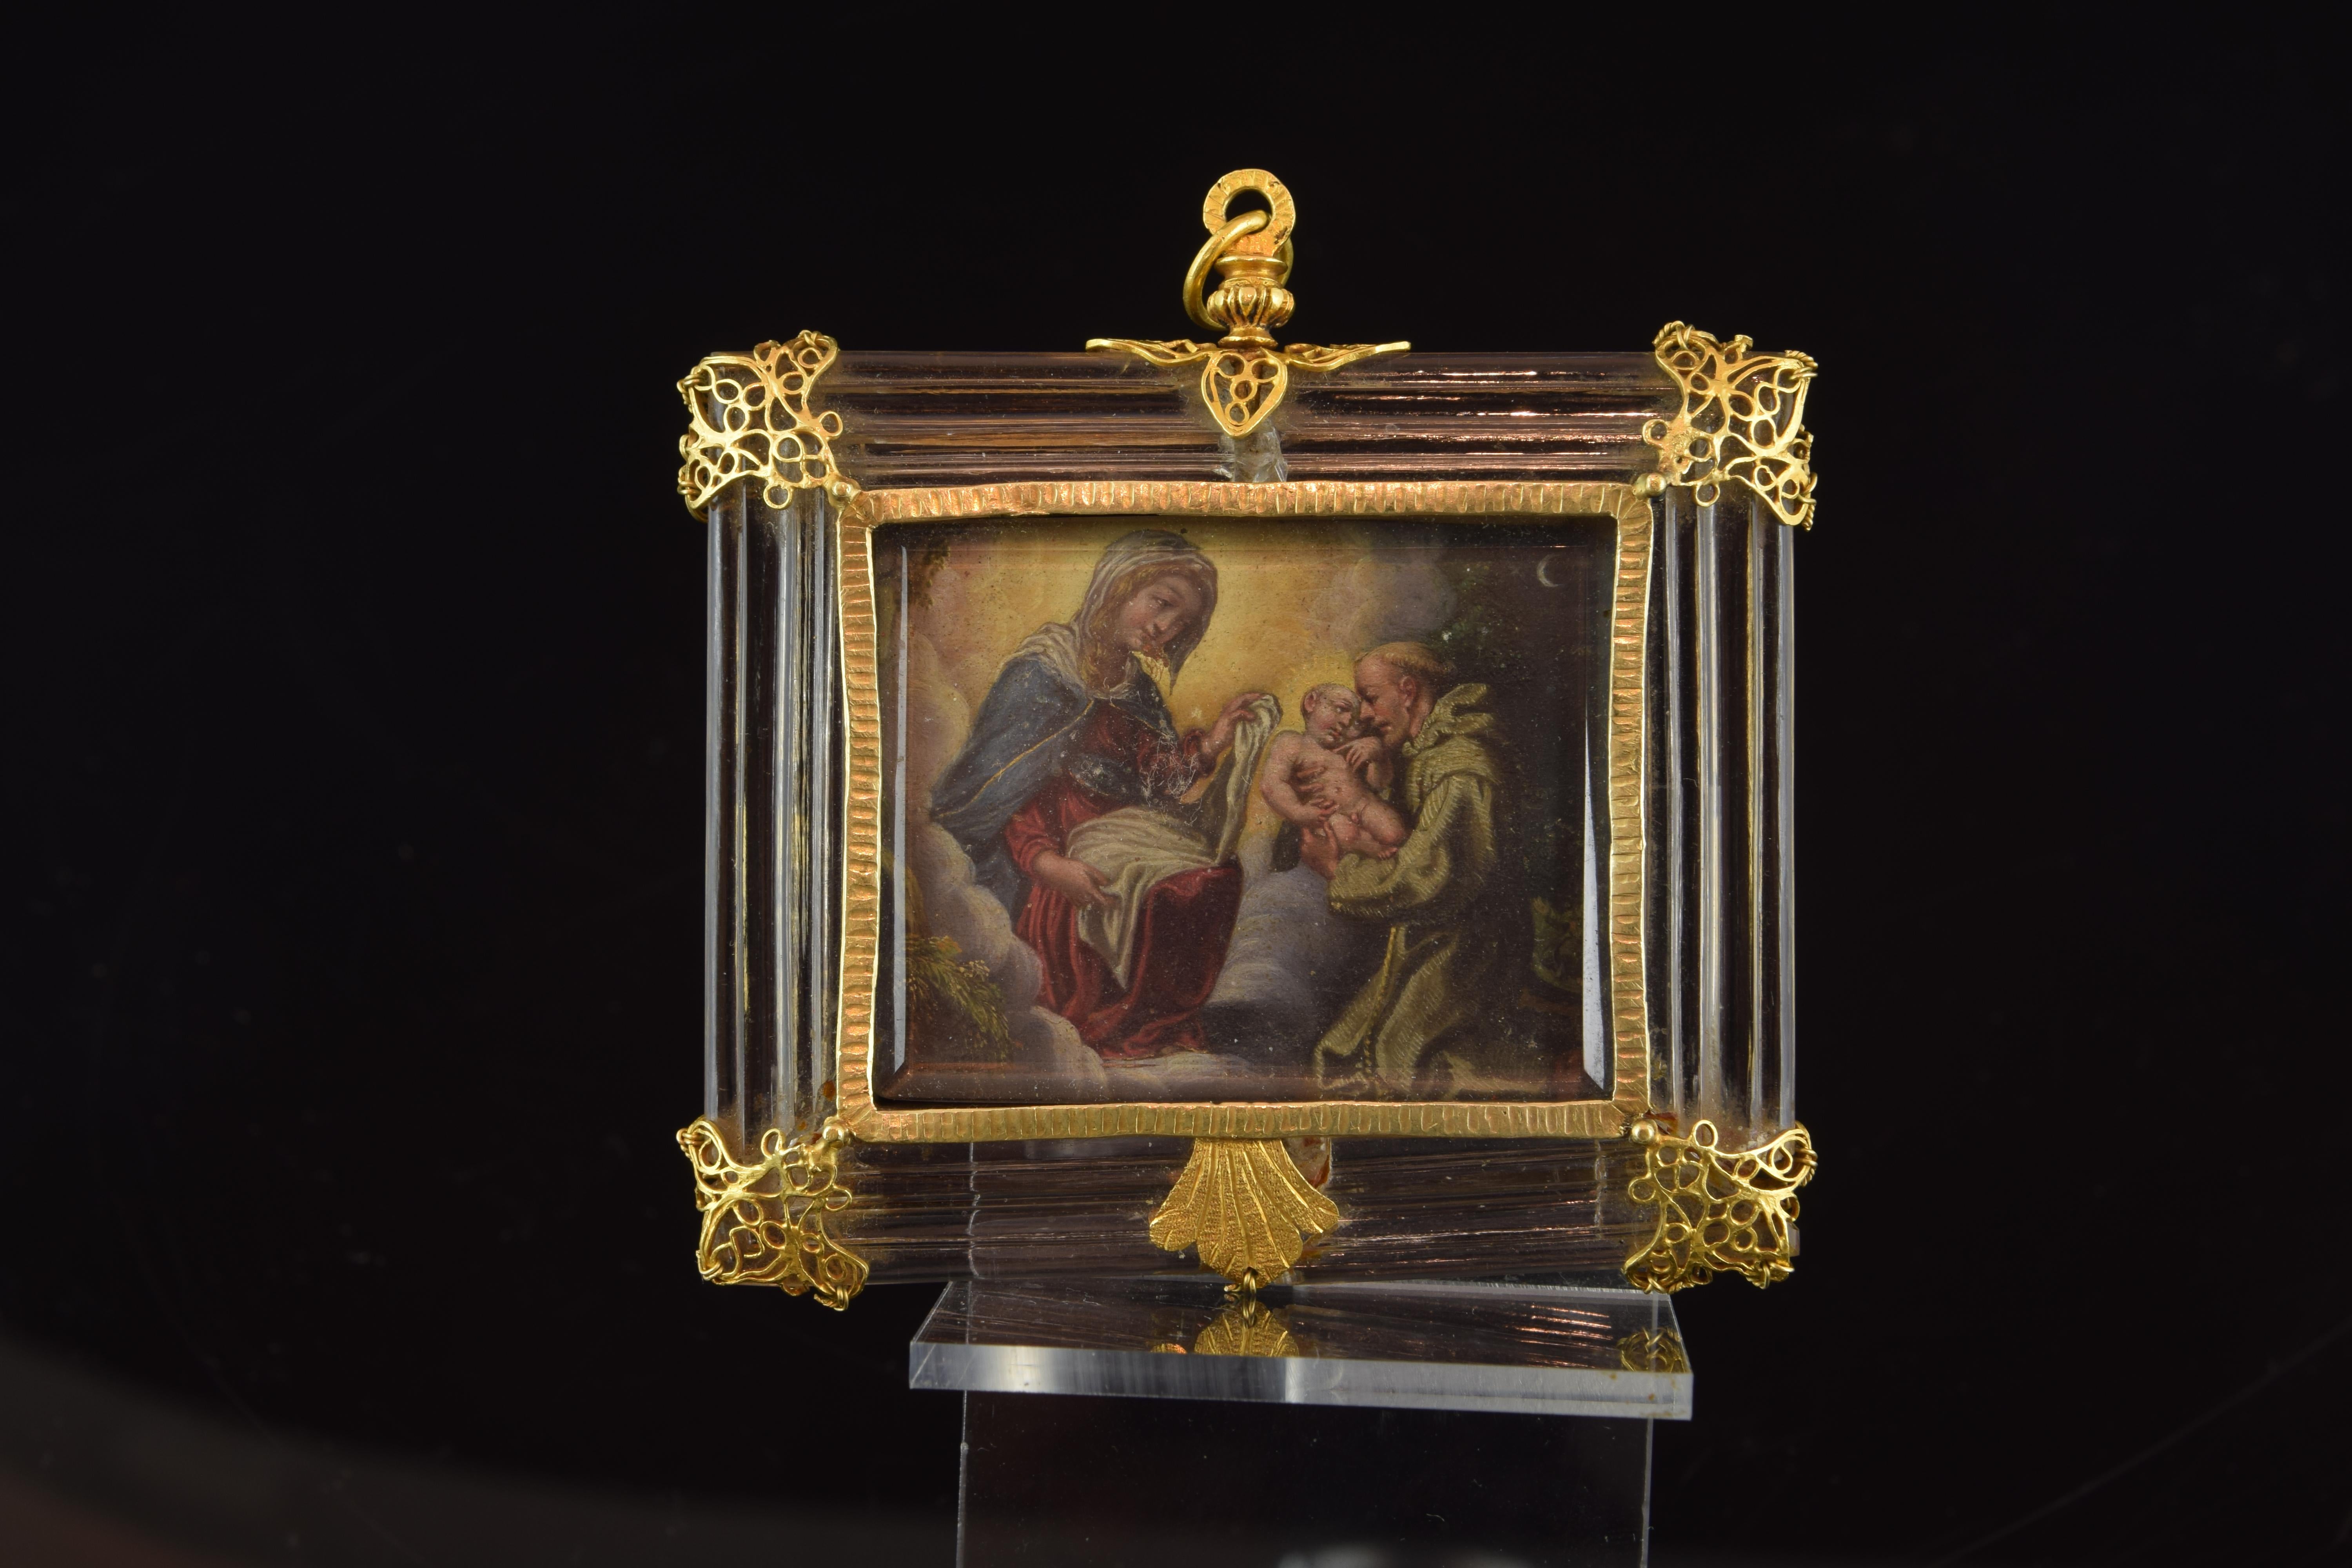 Devotional pendant showing a figurative scene with Saint Anthony of Padua receiving the Child Jesus from the Virgin Mary, around which a gold band with fine grooves has been placed to further enhance the carved rock crystal frame with fine moldings.